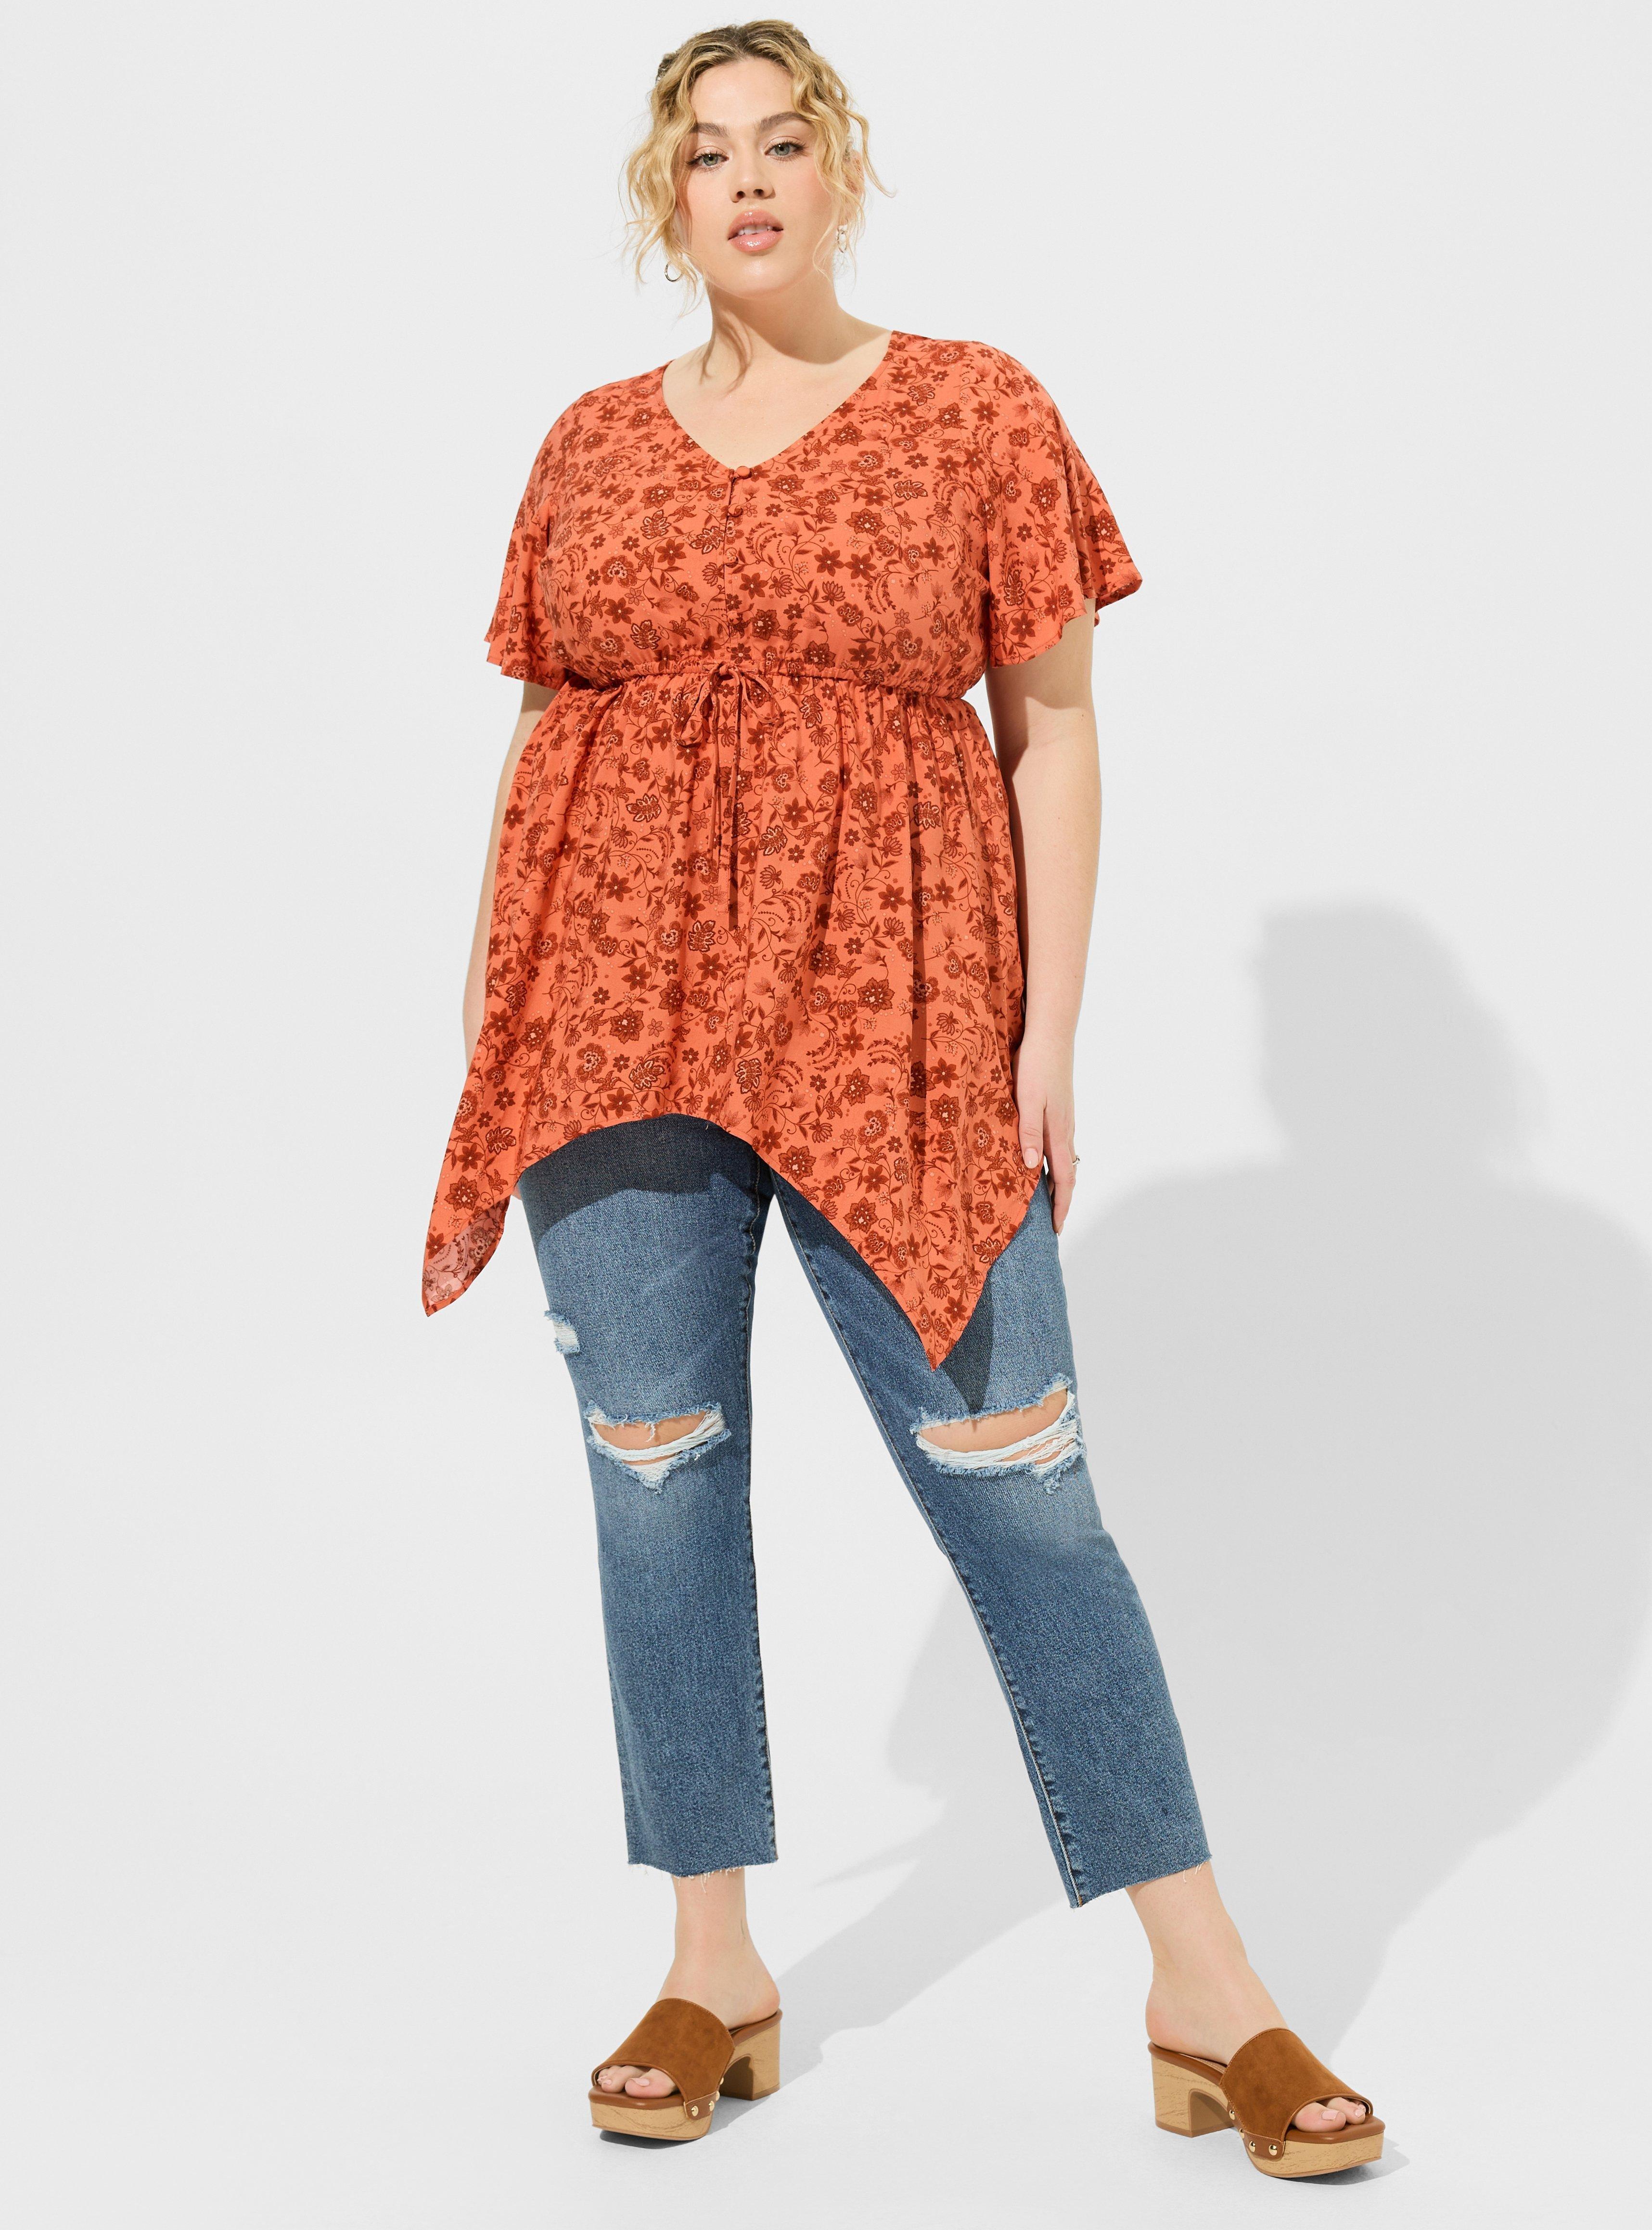 New Arrivals in Plus Size Shirts & Tops